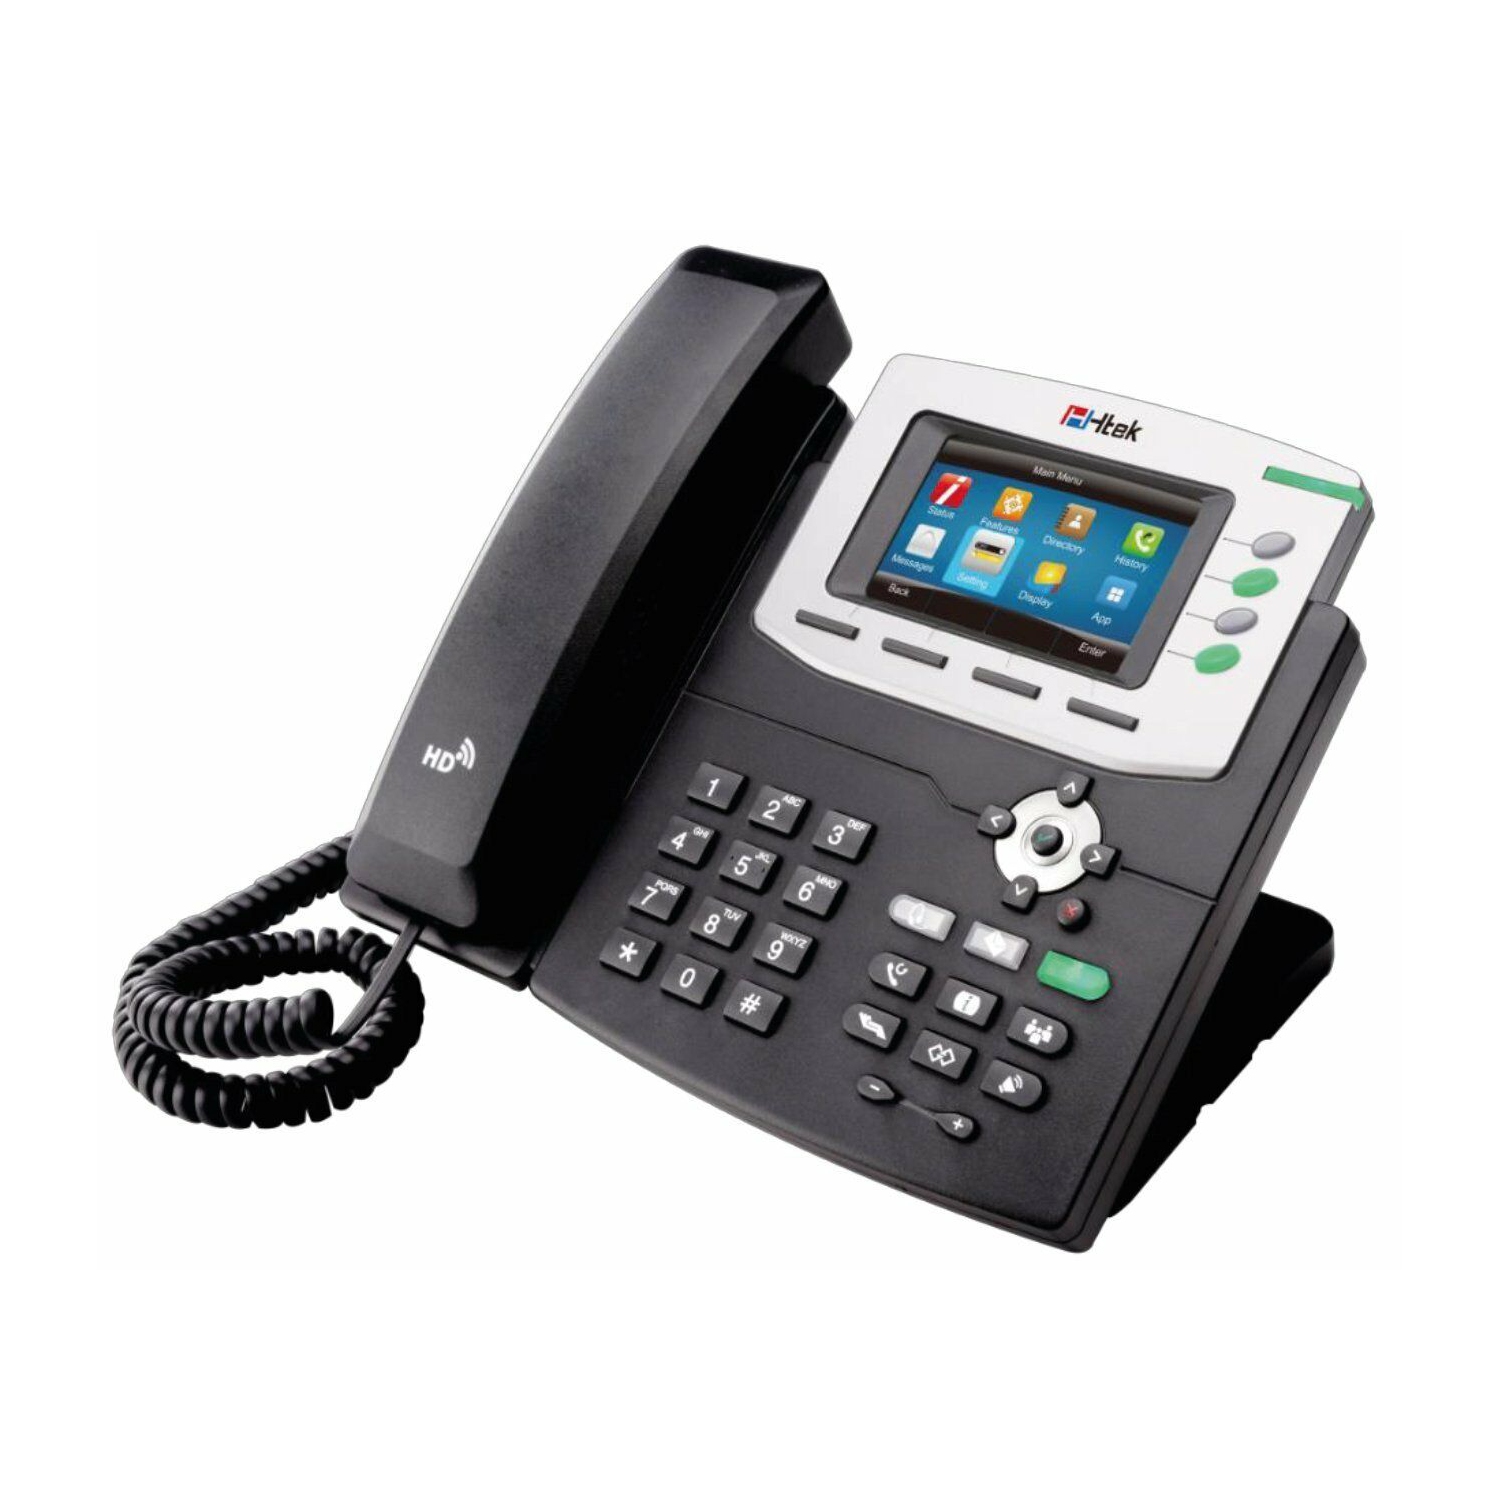 Htek UC860P Color HD VoIP IP PoE Phone w/ Power Supply BRAND NEW 4-Lines 